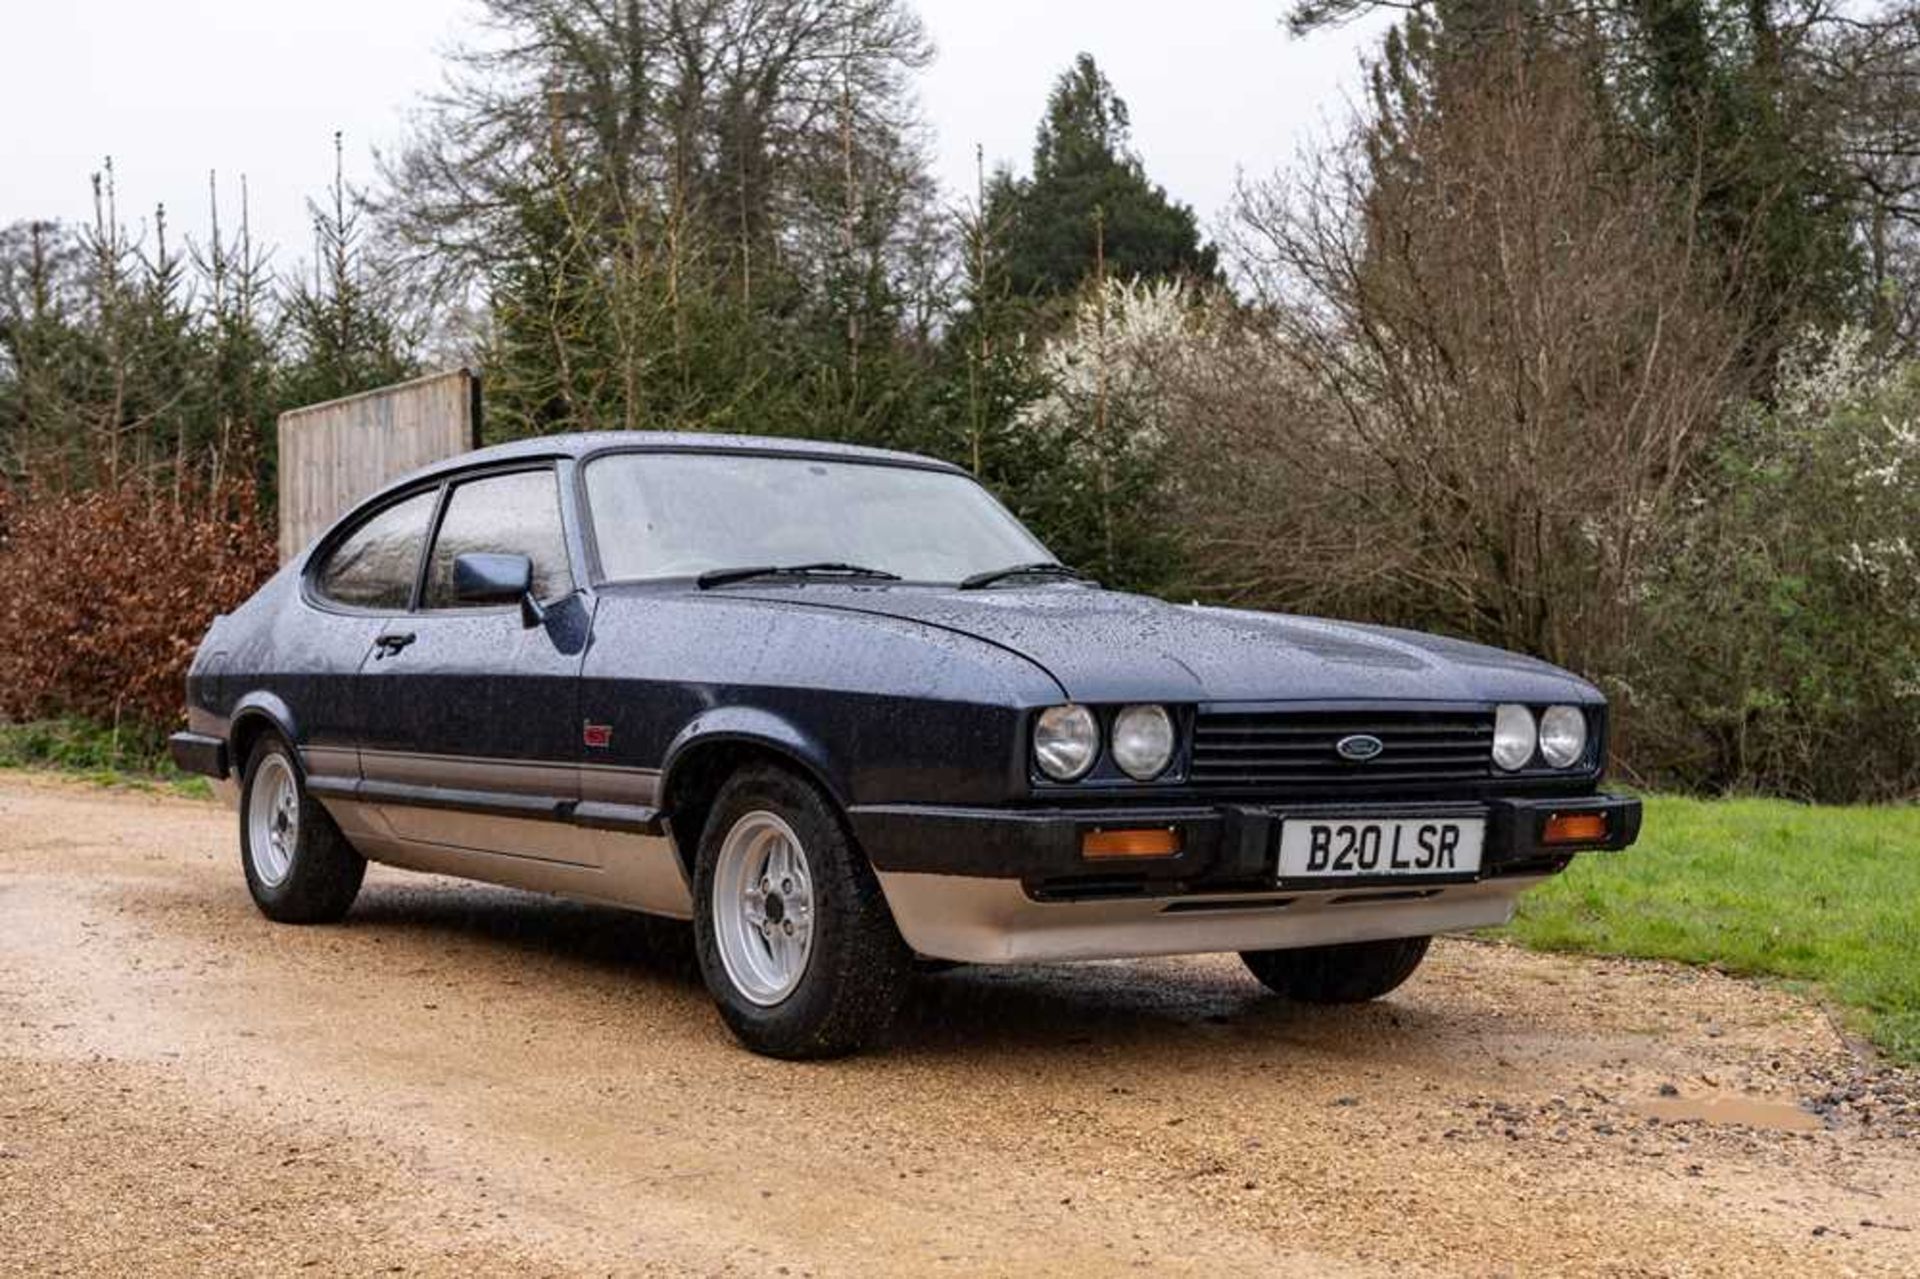 1985 Ford Capri Laser 2.0 Litre Warranted 55,300 miles from new - Image 2 of 67